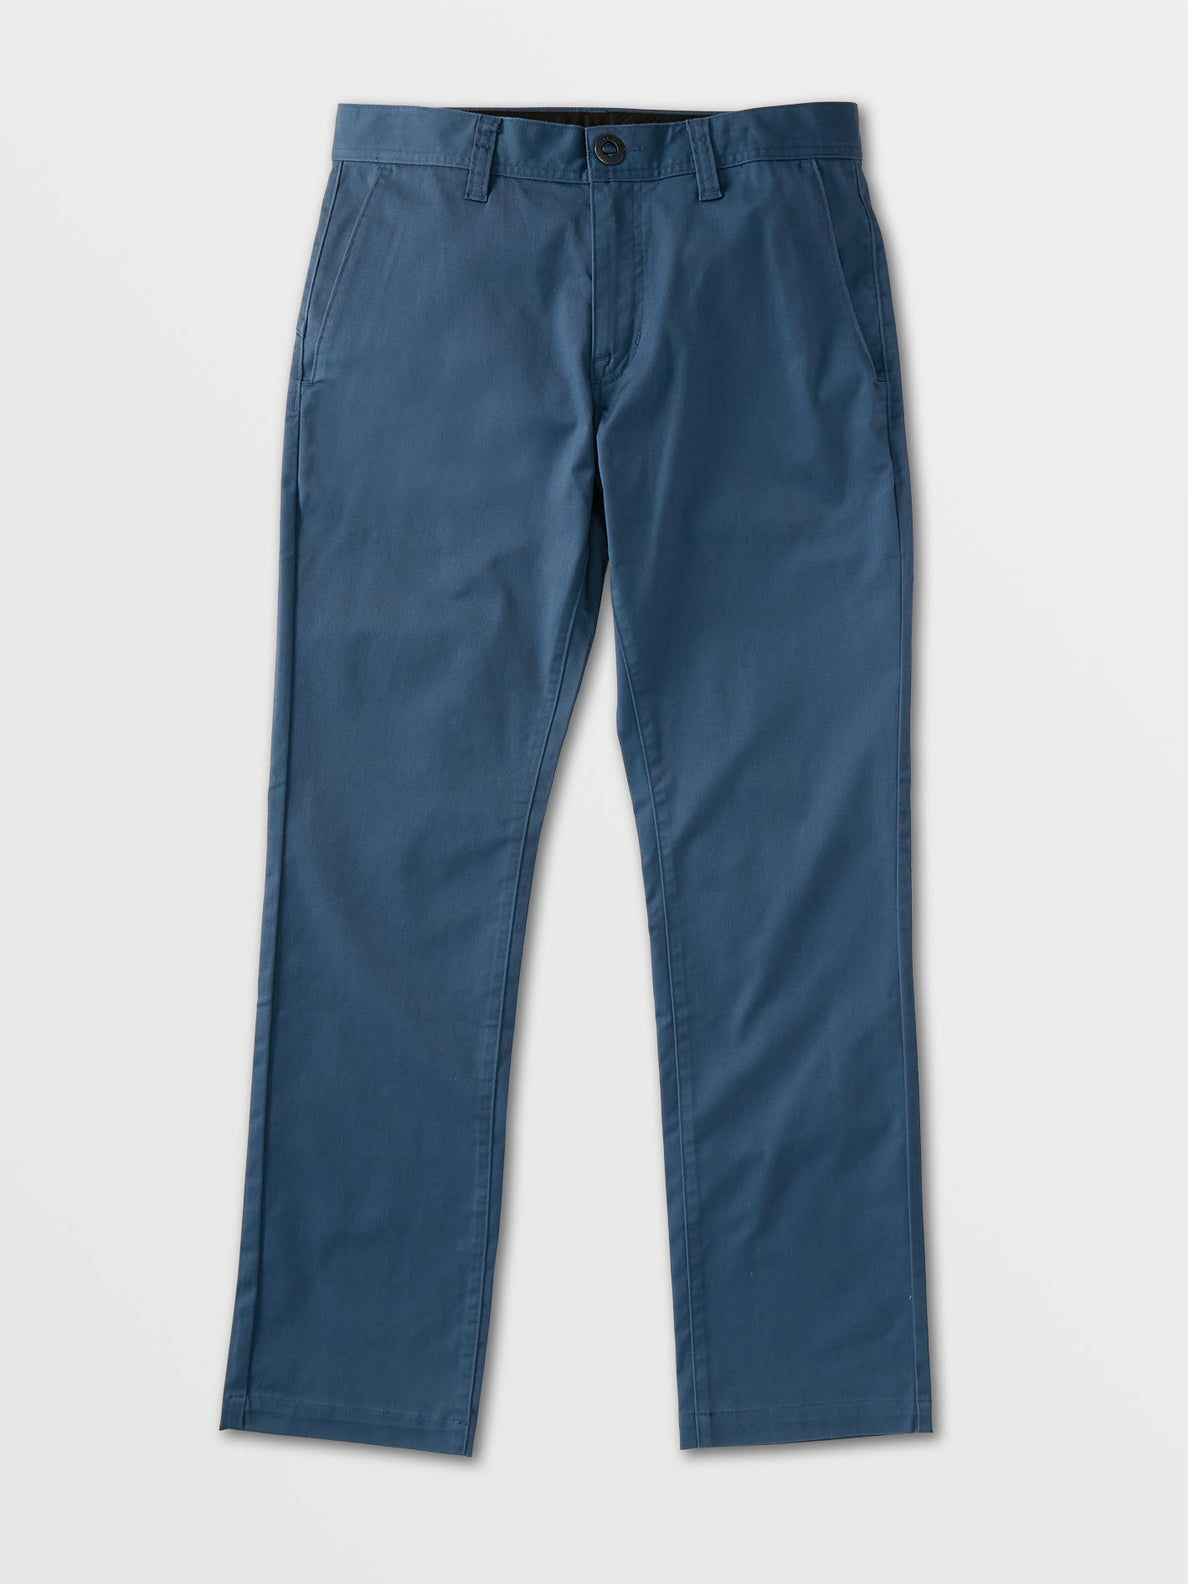 Buy Cadet Blue Chinos for Men Online in India at Beyoung